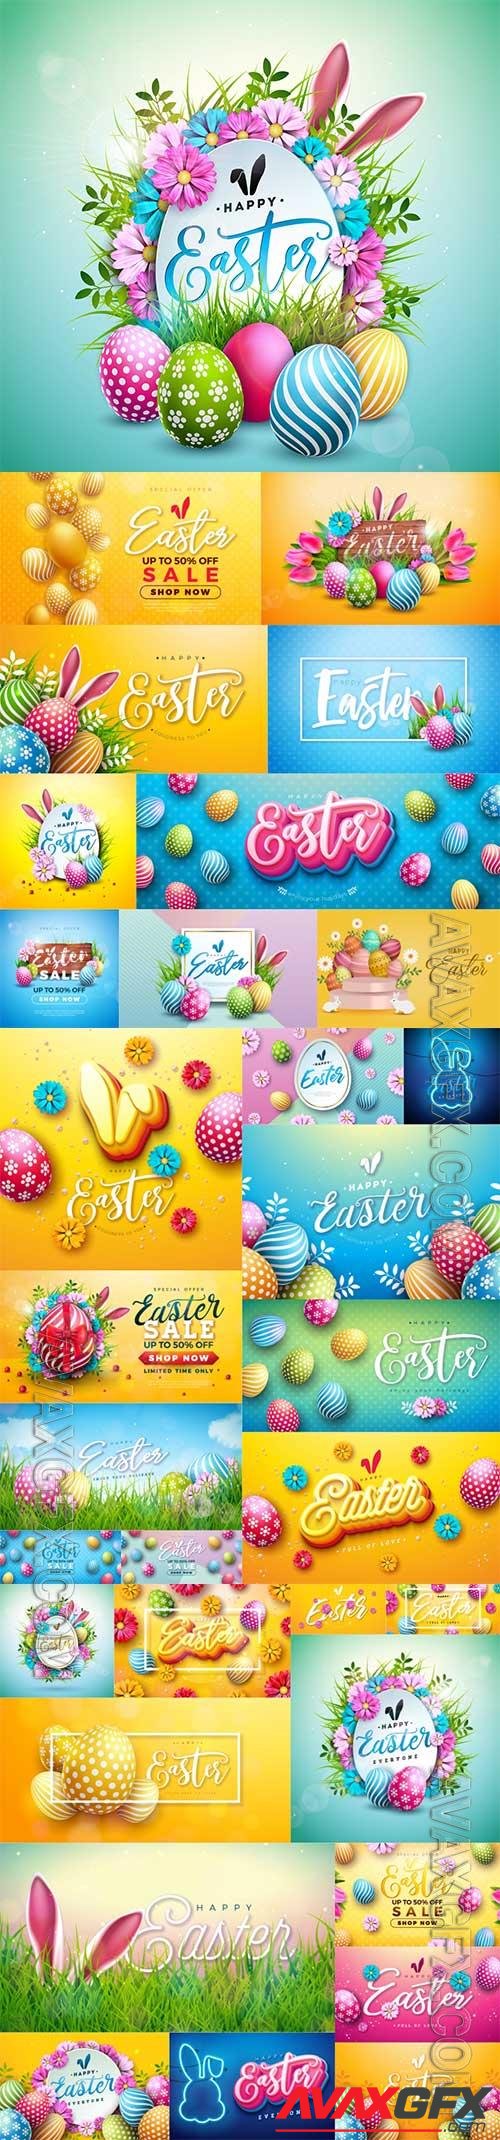 Vector illustration of happy easter holiday with colorful egg and bunny